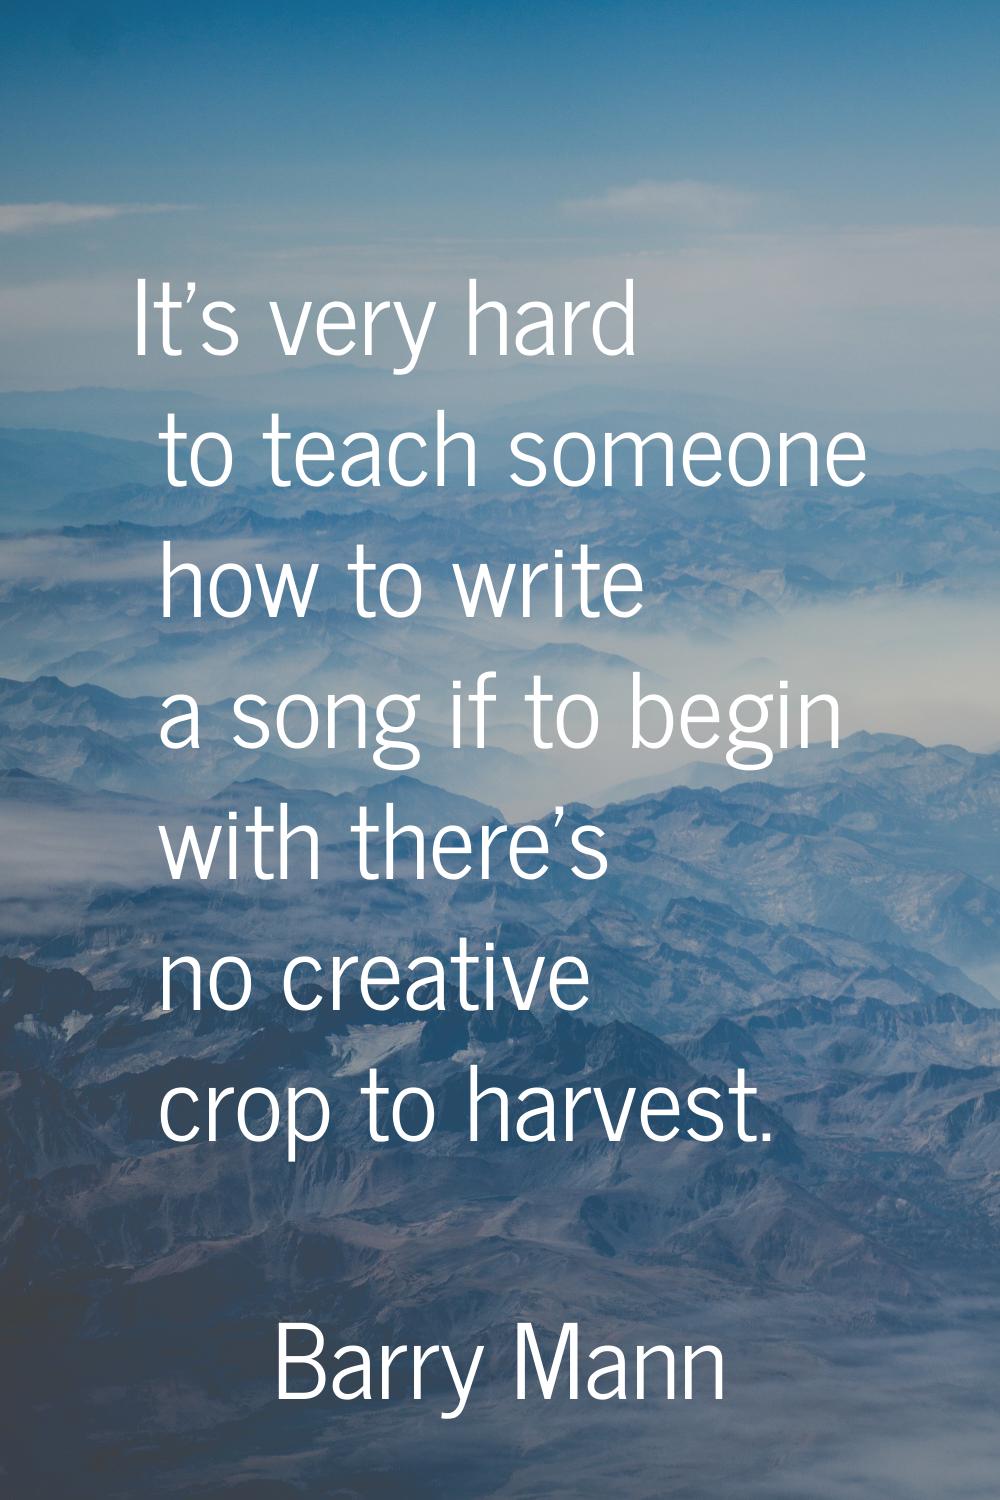 It's very hard to teach someone how to write a song if to begin with there's no creative crop to ha